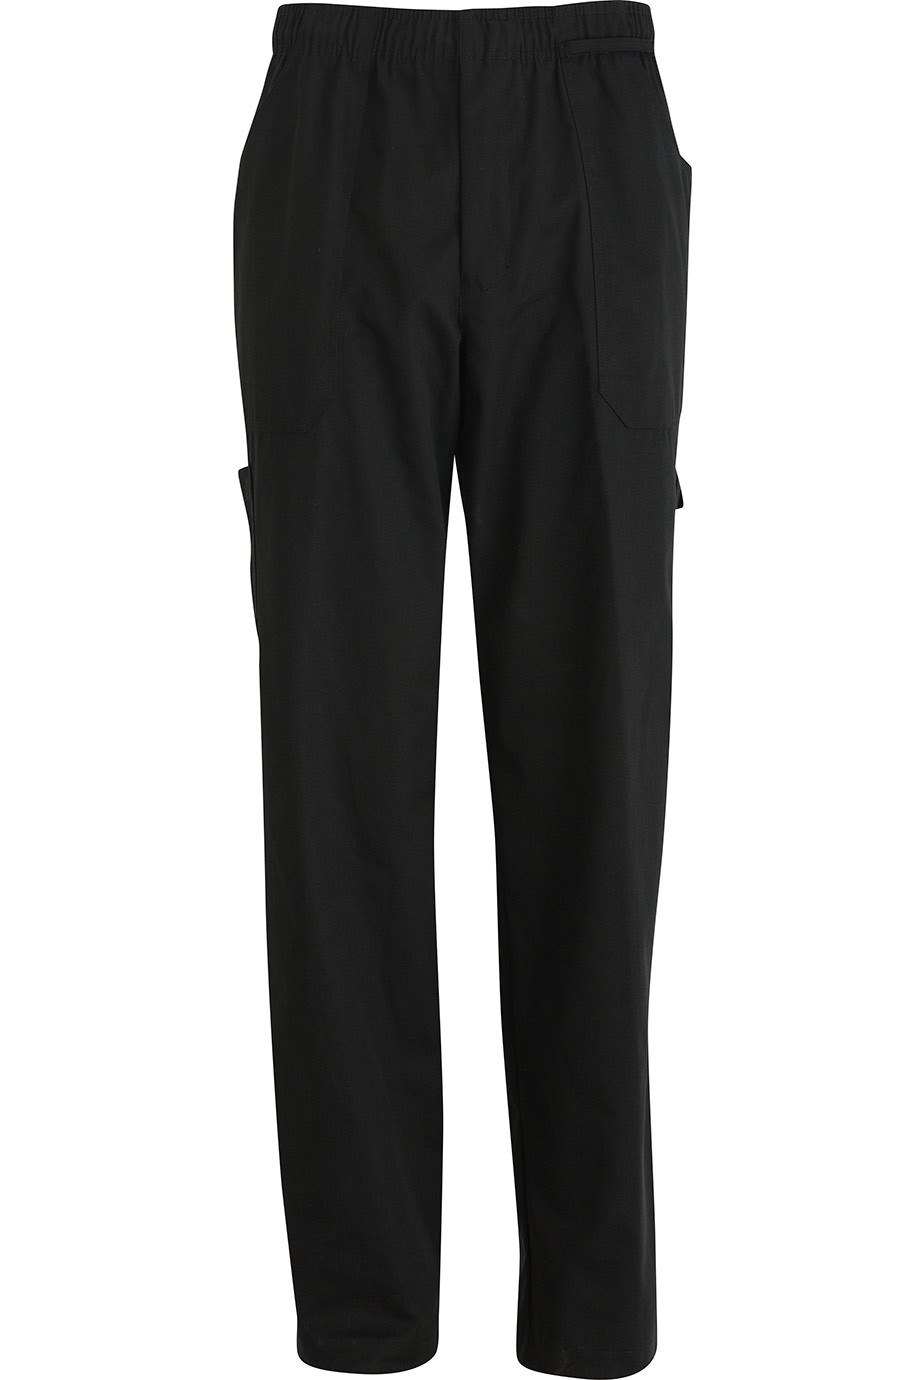 THE CARGO CHEF PANT